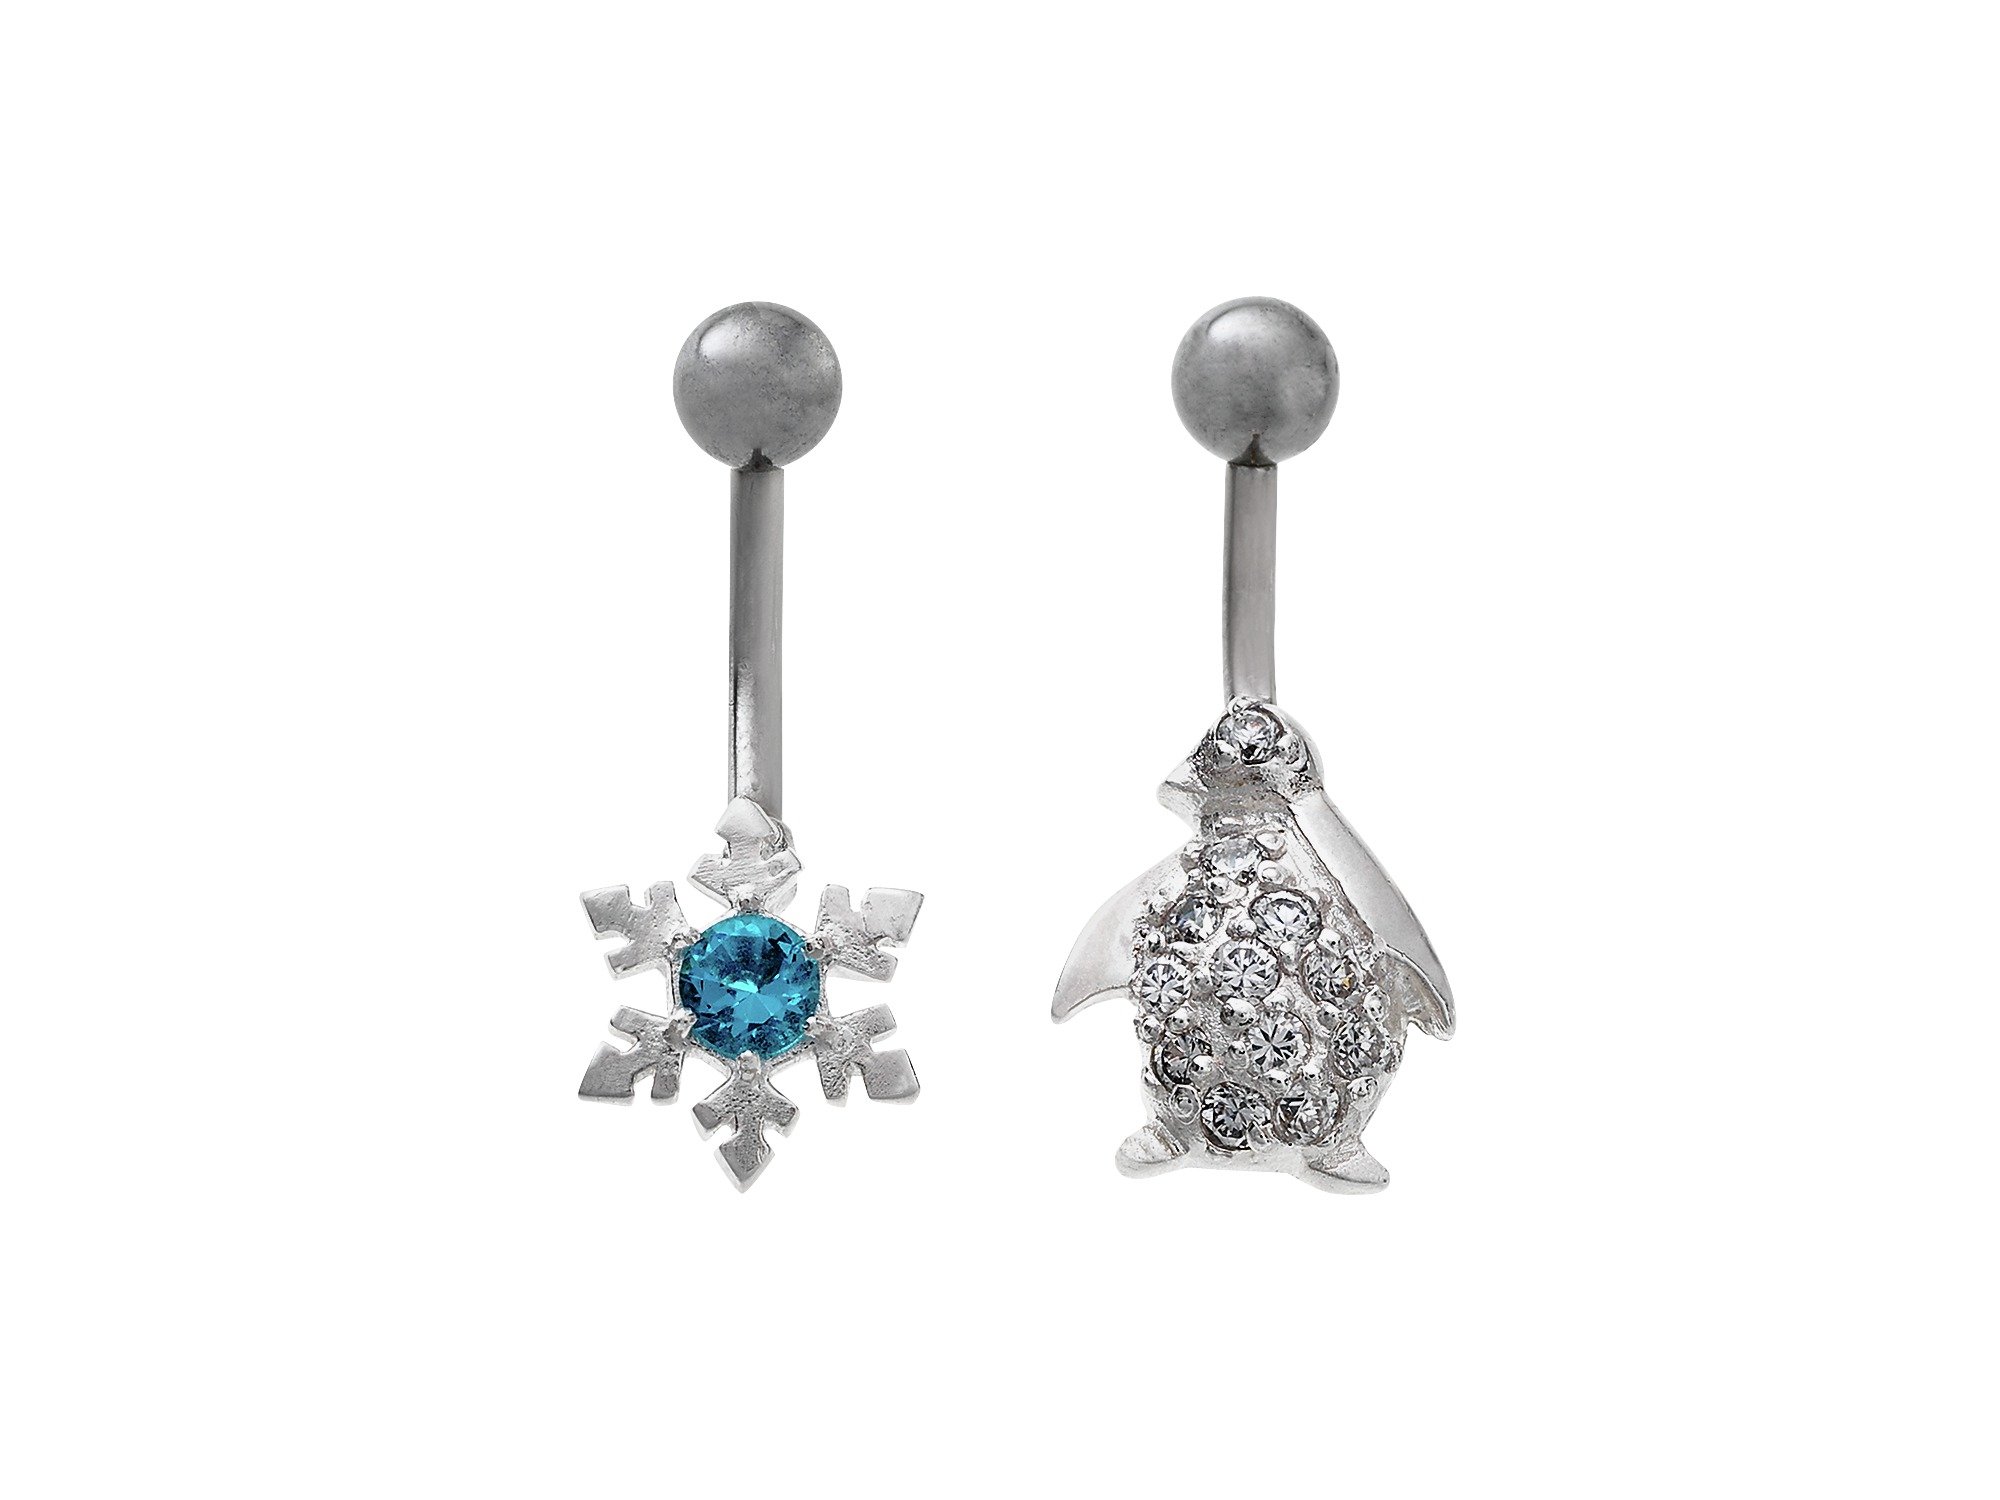 My Body Candy Stainless Steel Winter Belly Bars - Set of 2.